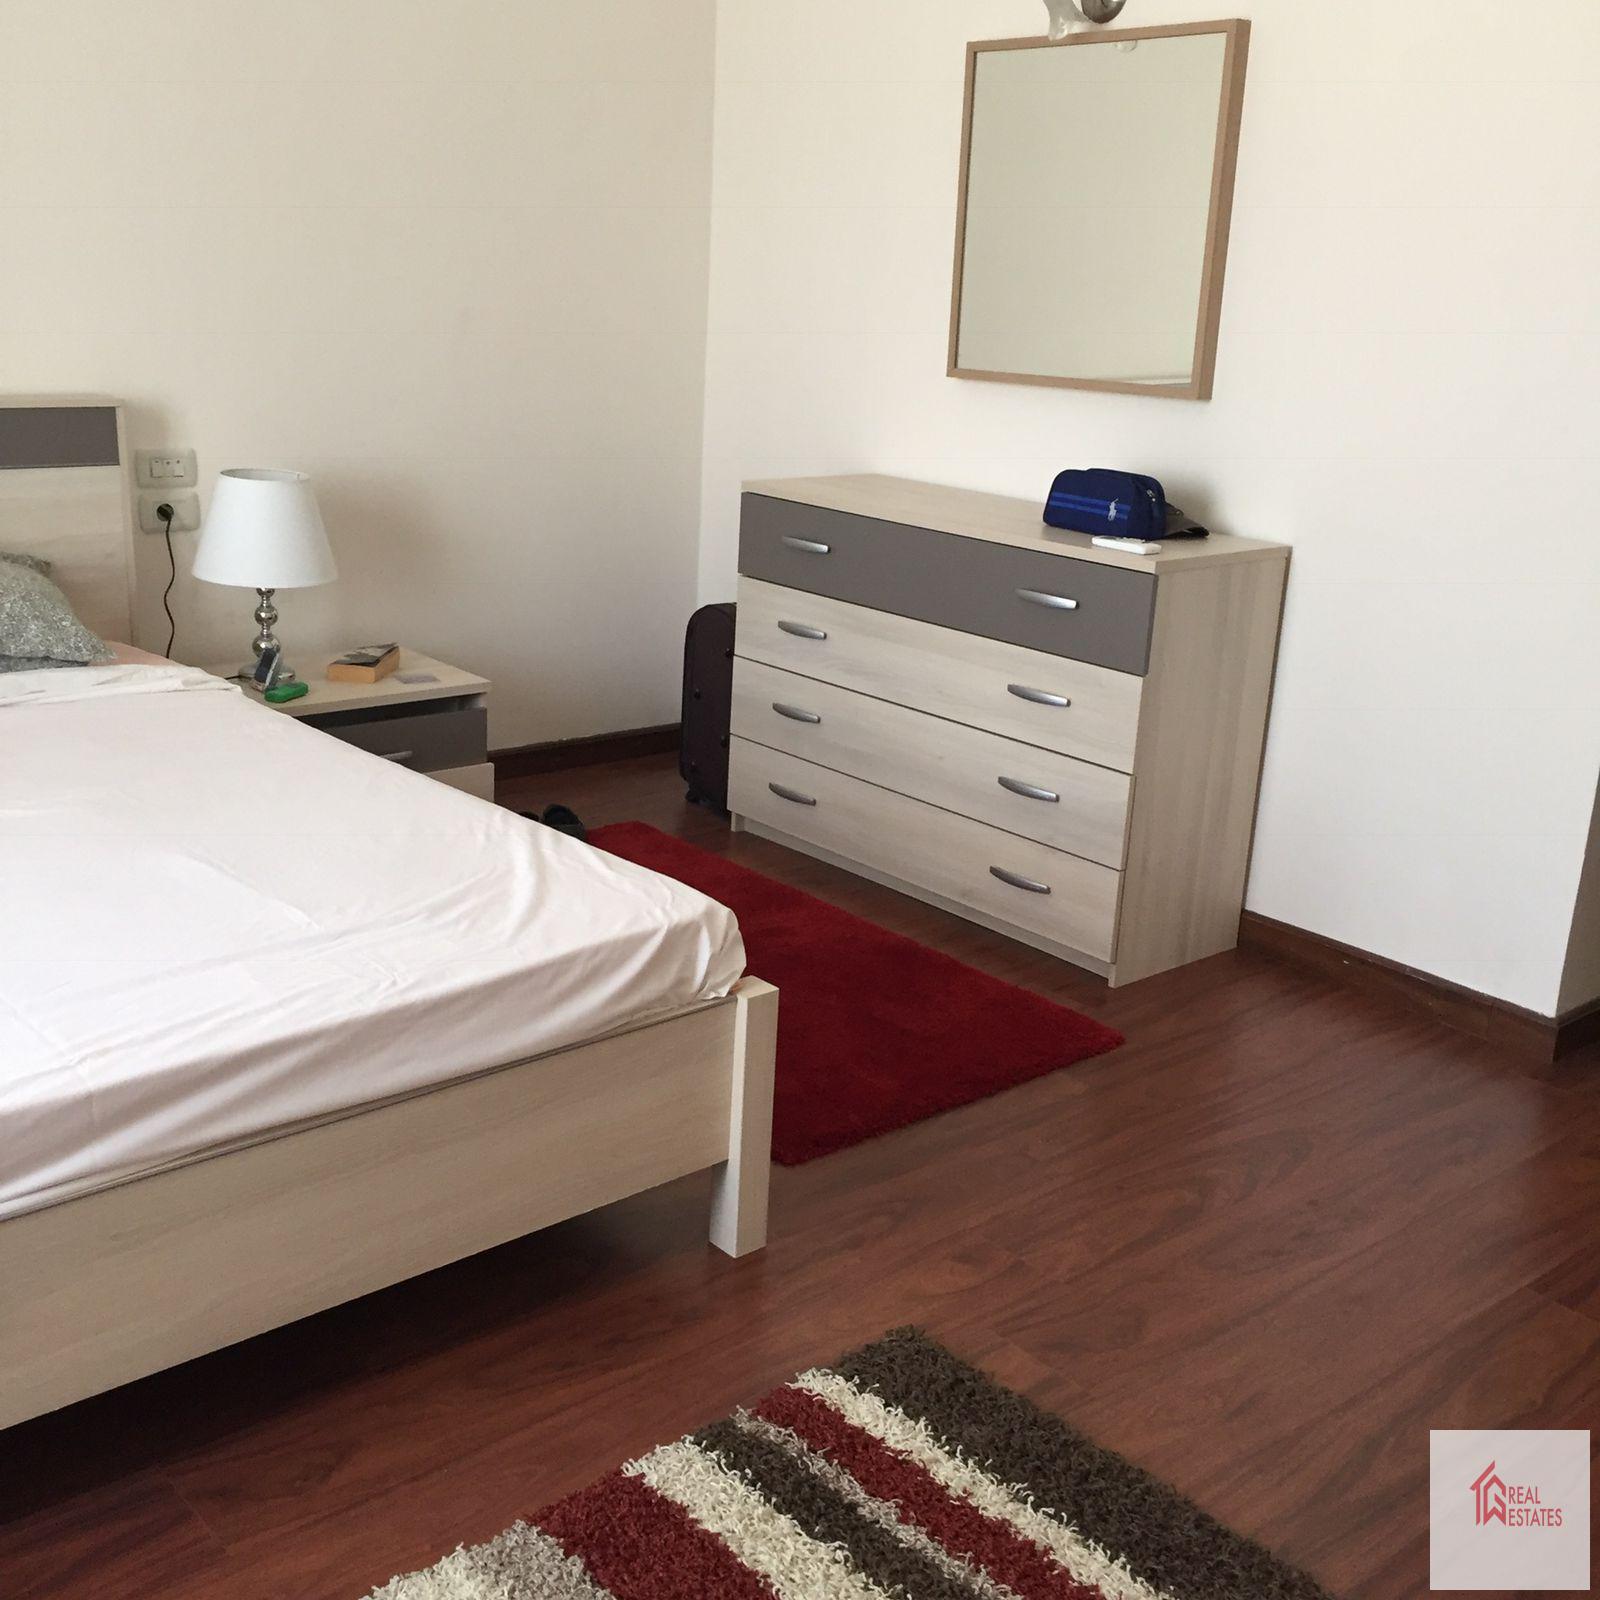 Modern furnished apartment rent katameya heights 2 bathrooms e suits apartment building